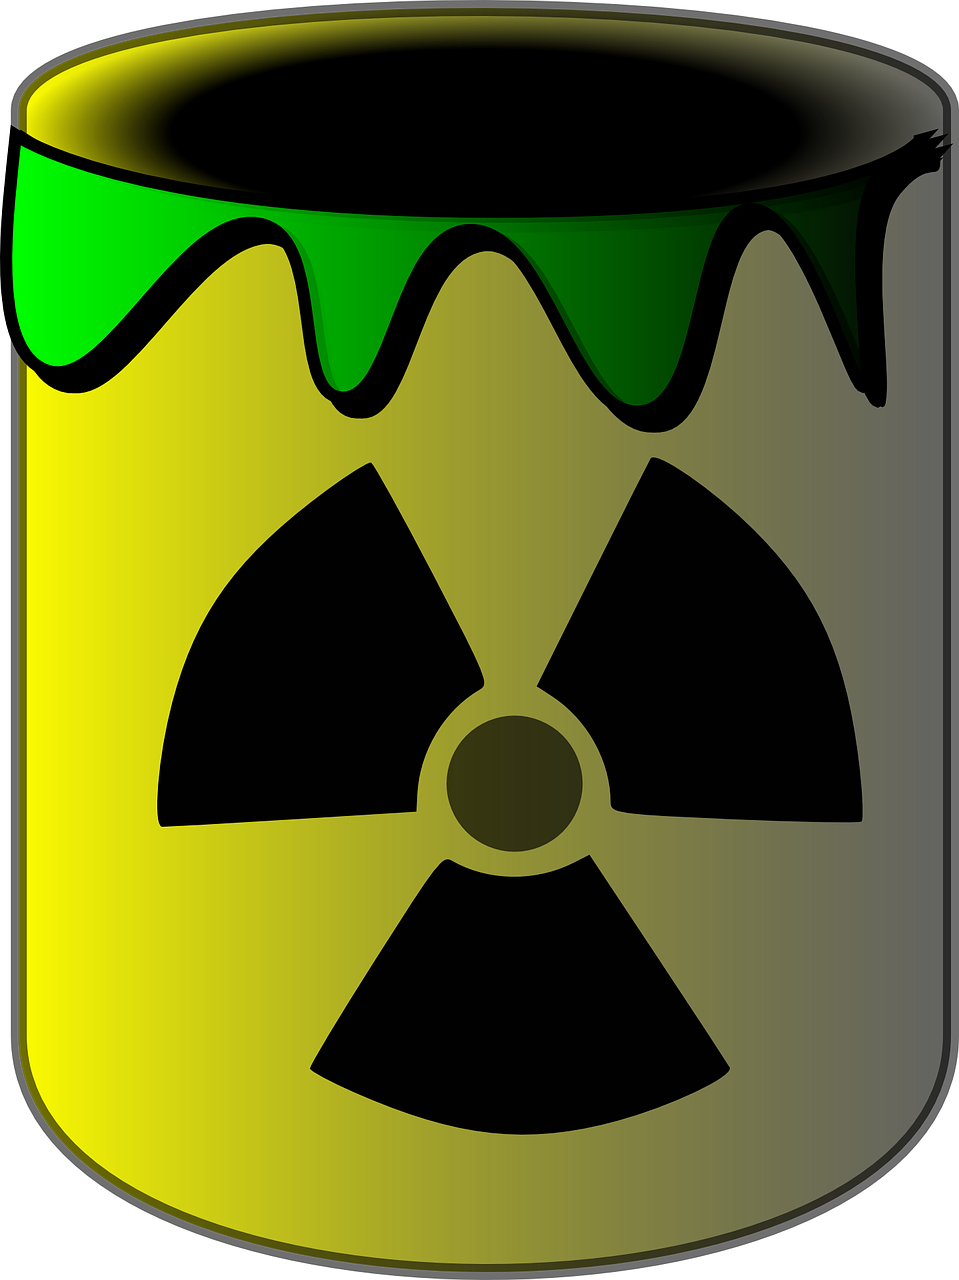 Barrel clipart nuclear waste. Toxic dump radioactive png